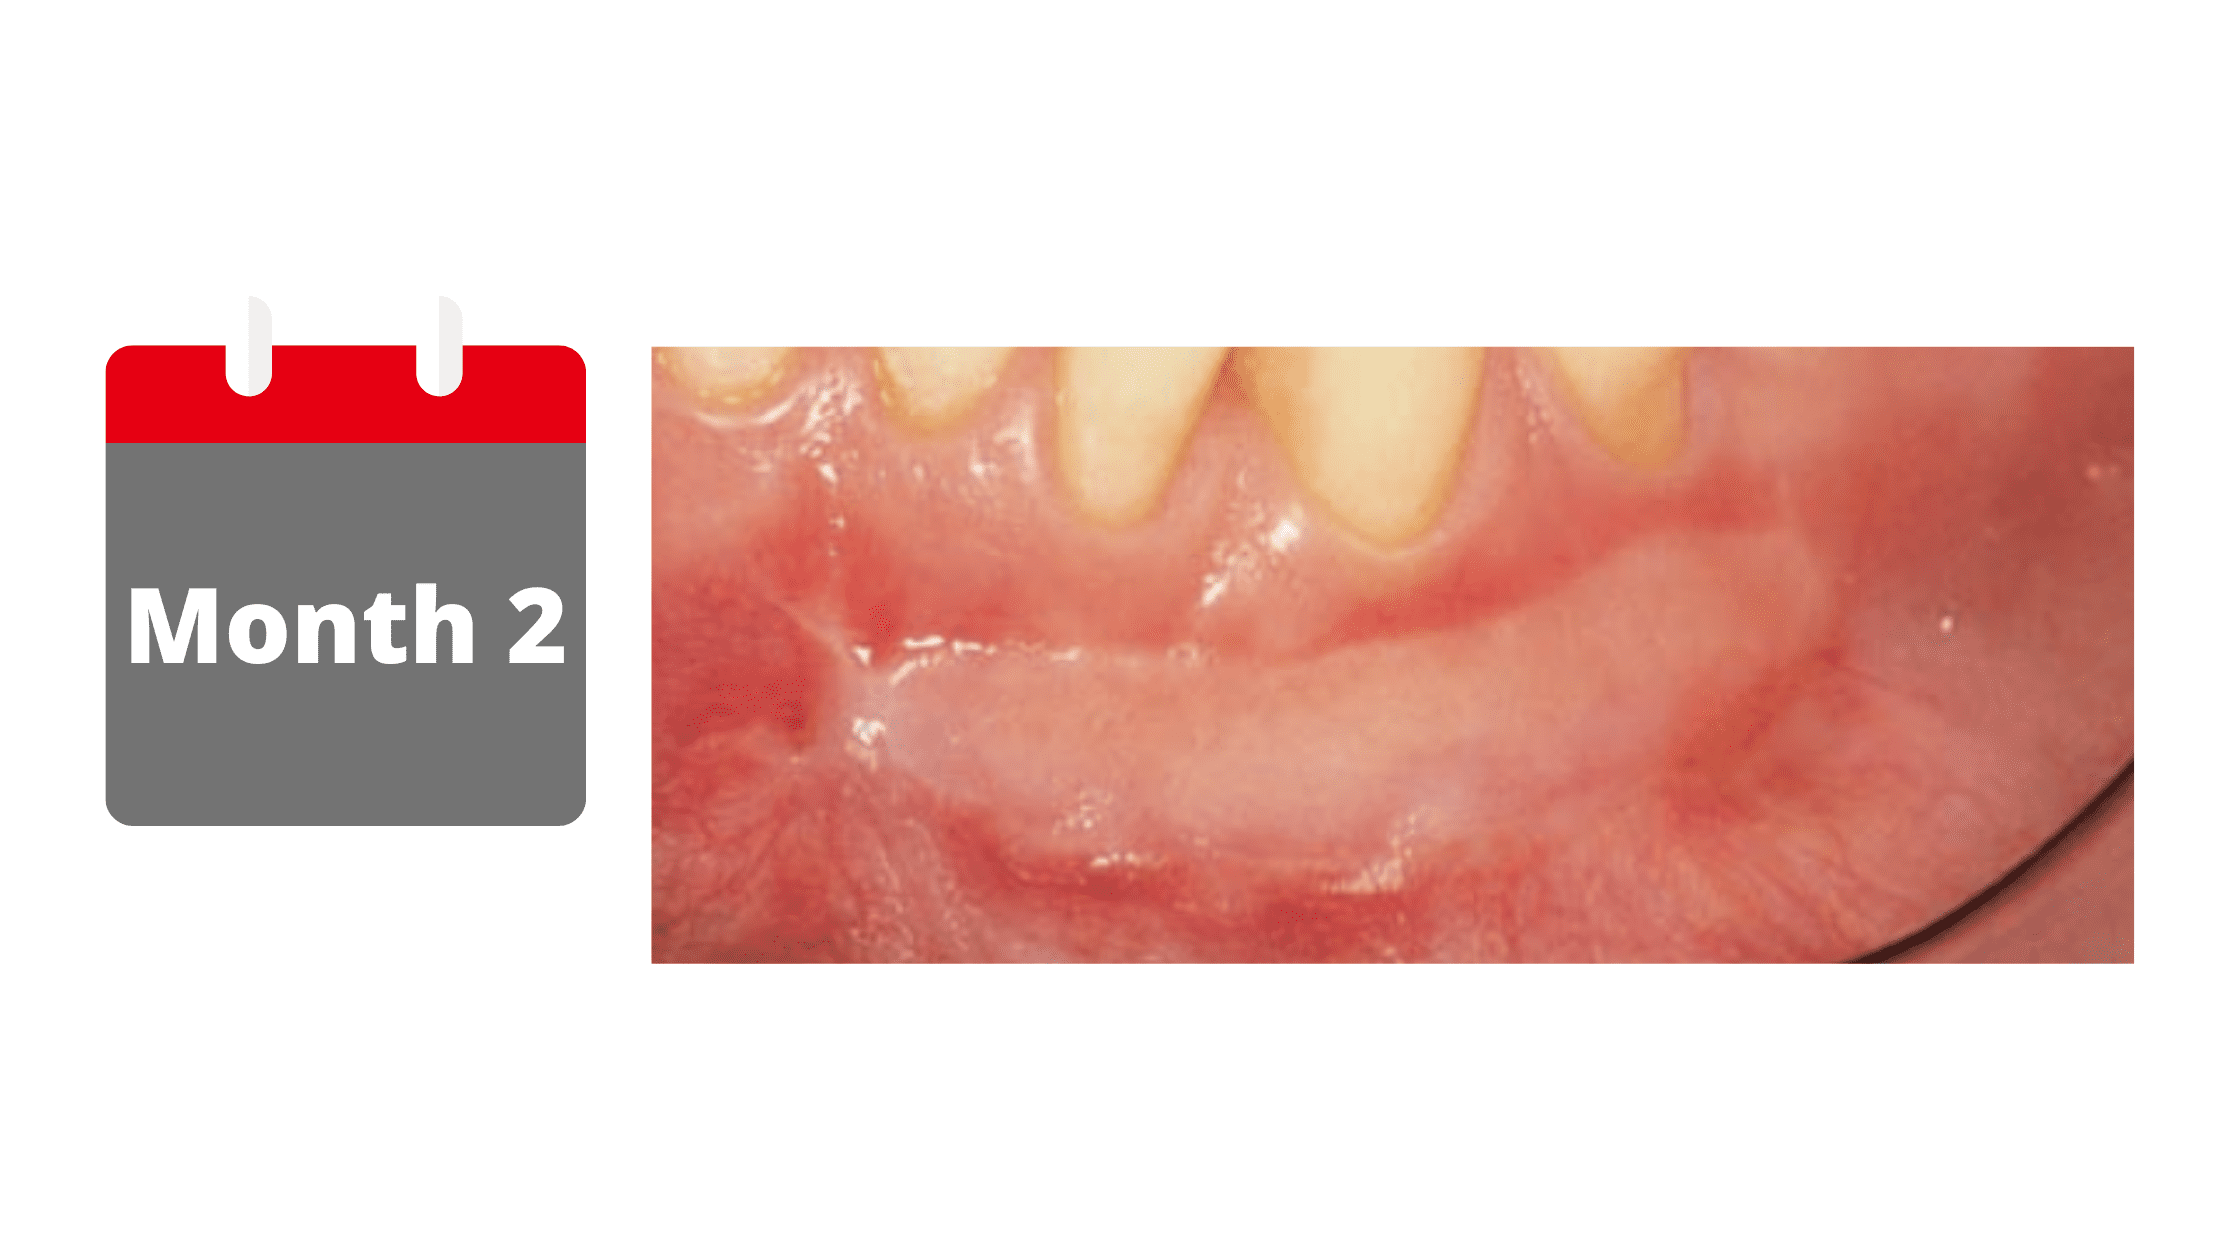 The fourth stage of gum graft healing: After 2 months 